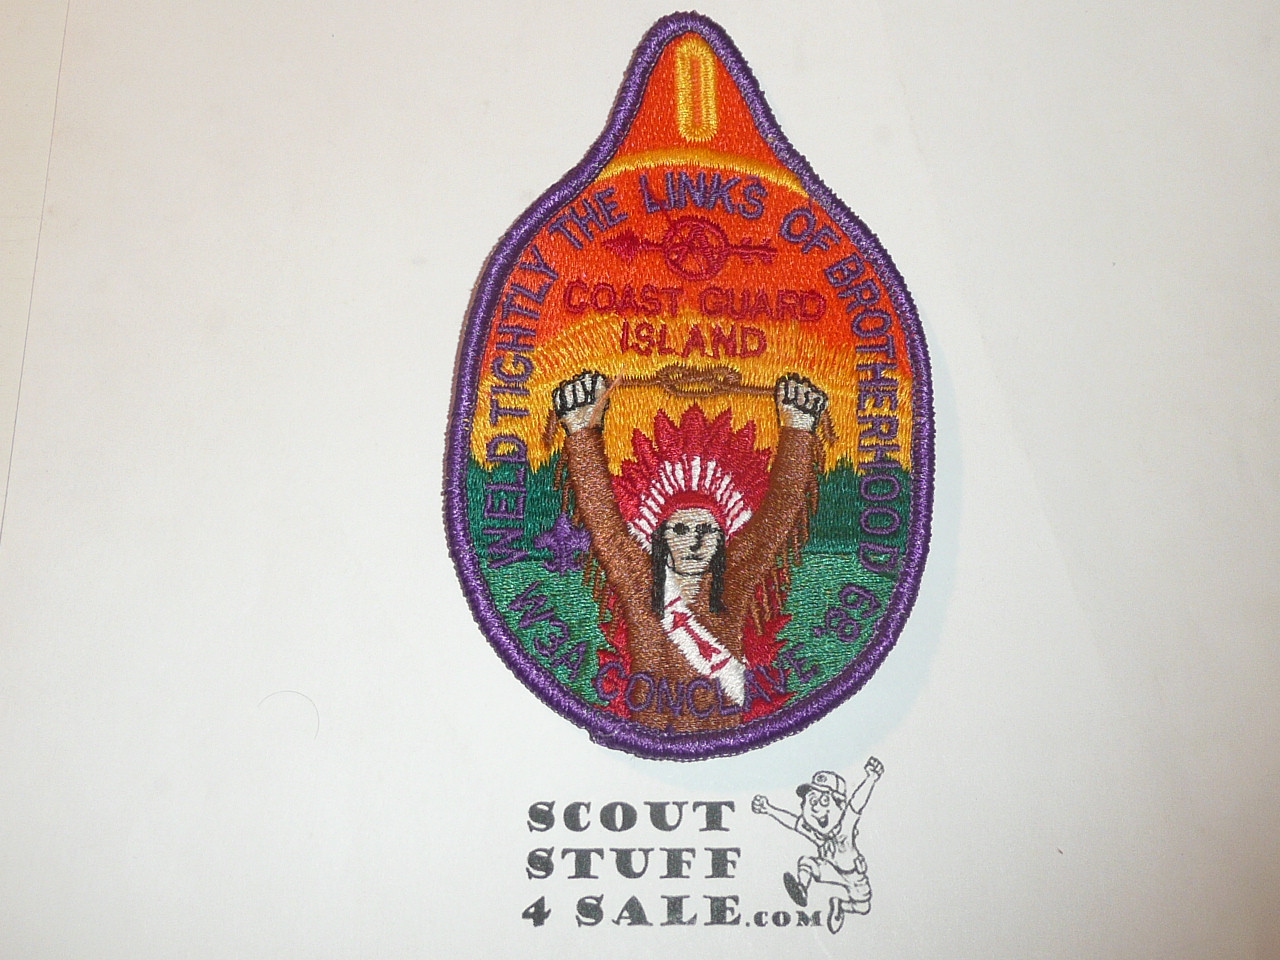 Section W3A 1989 O.A. Conclave STAFF Patch - Scout